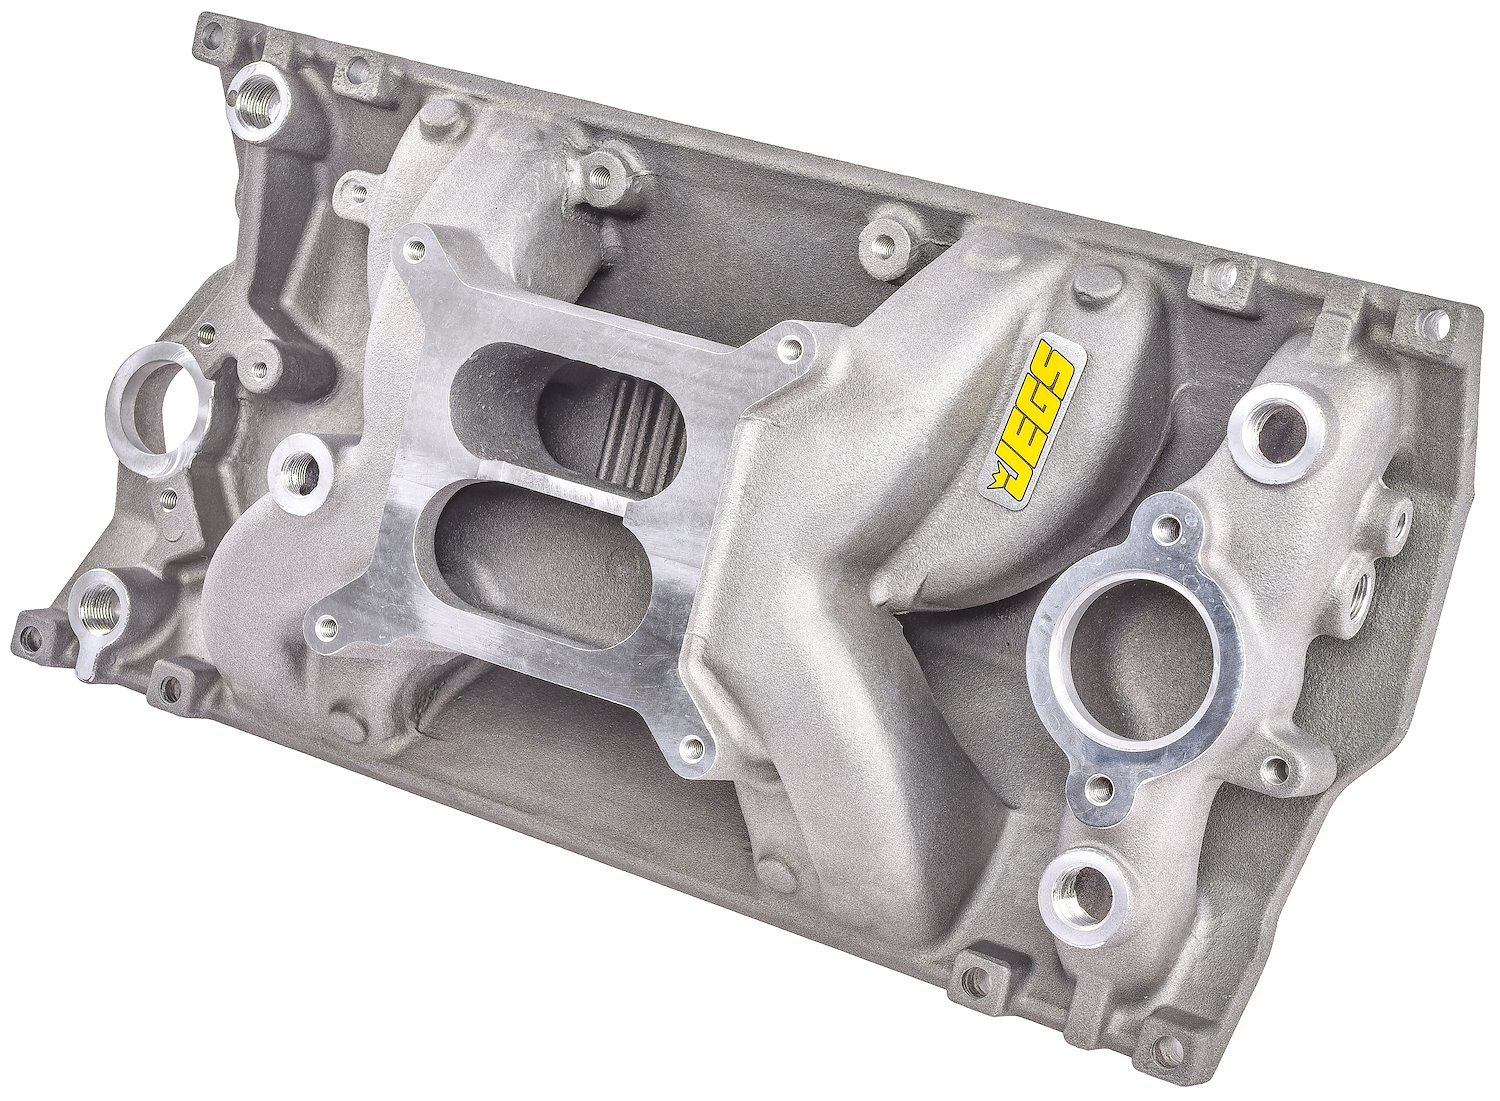 Cool Gap Intake Manifold for Small Block Chevy with 1996-2002 Vortec L31 Cast Iron Heads, Dual Plane [Satin]